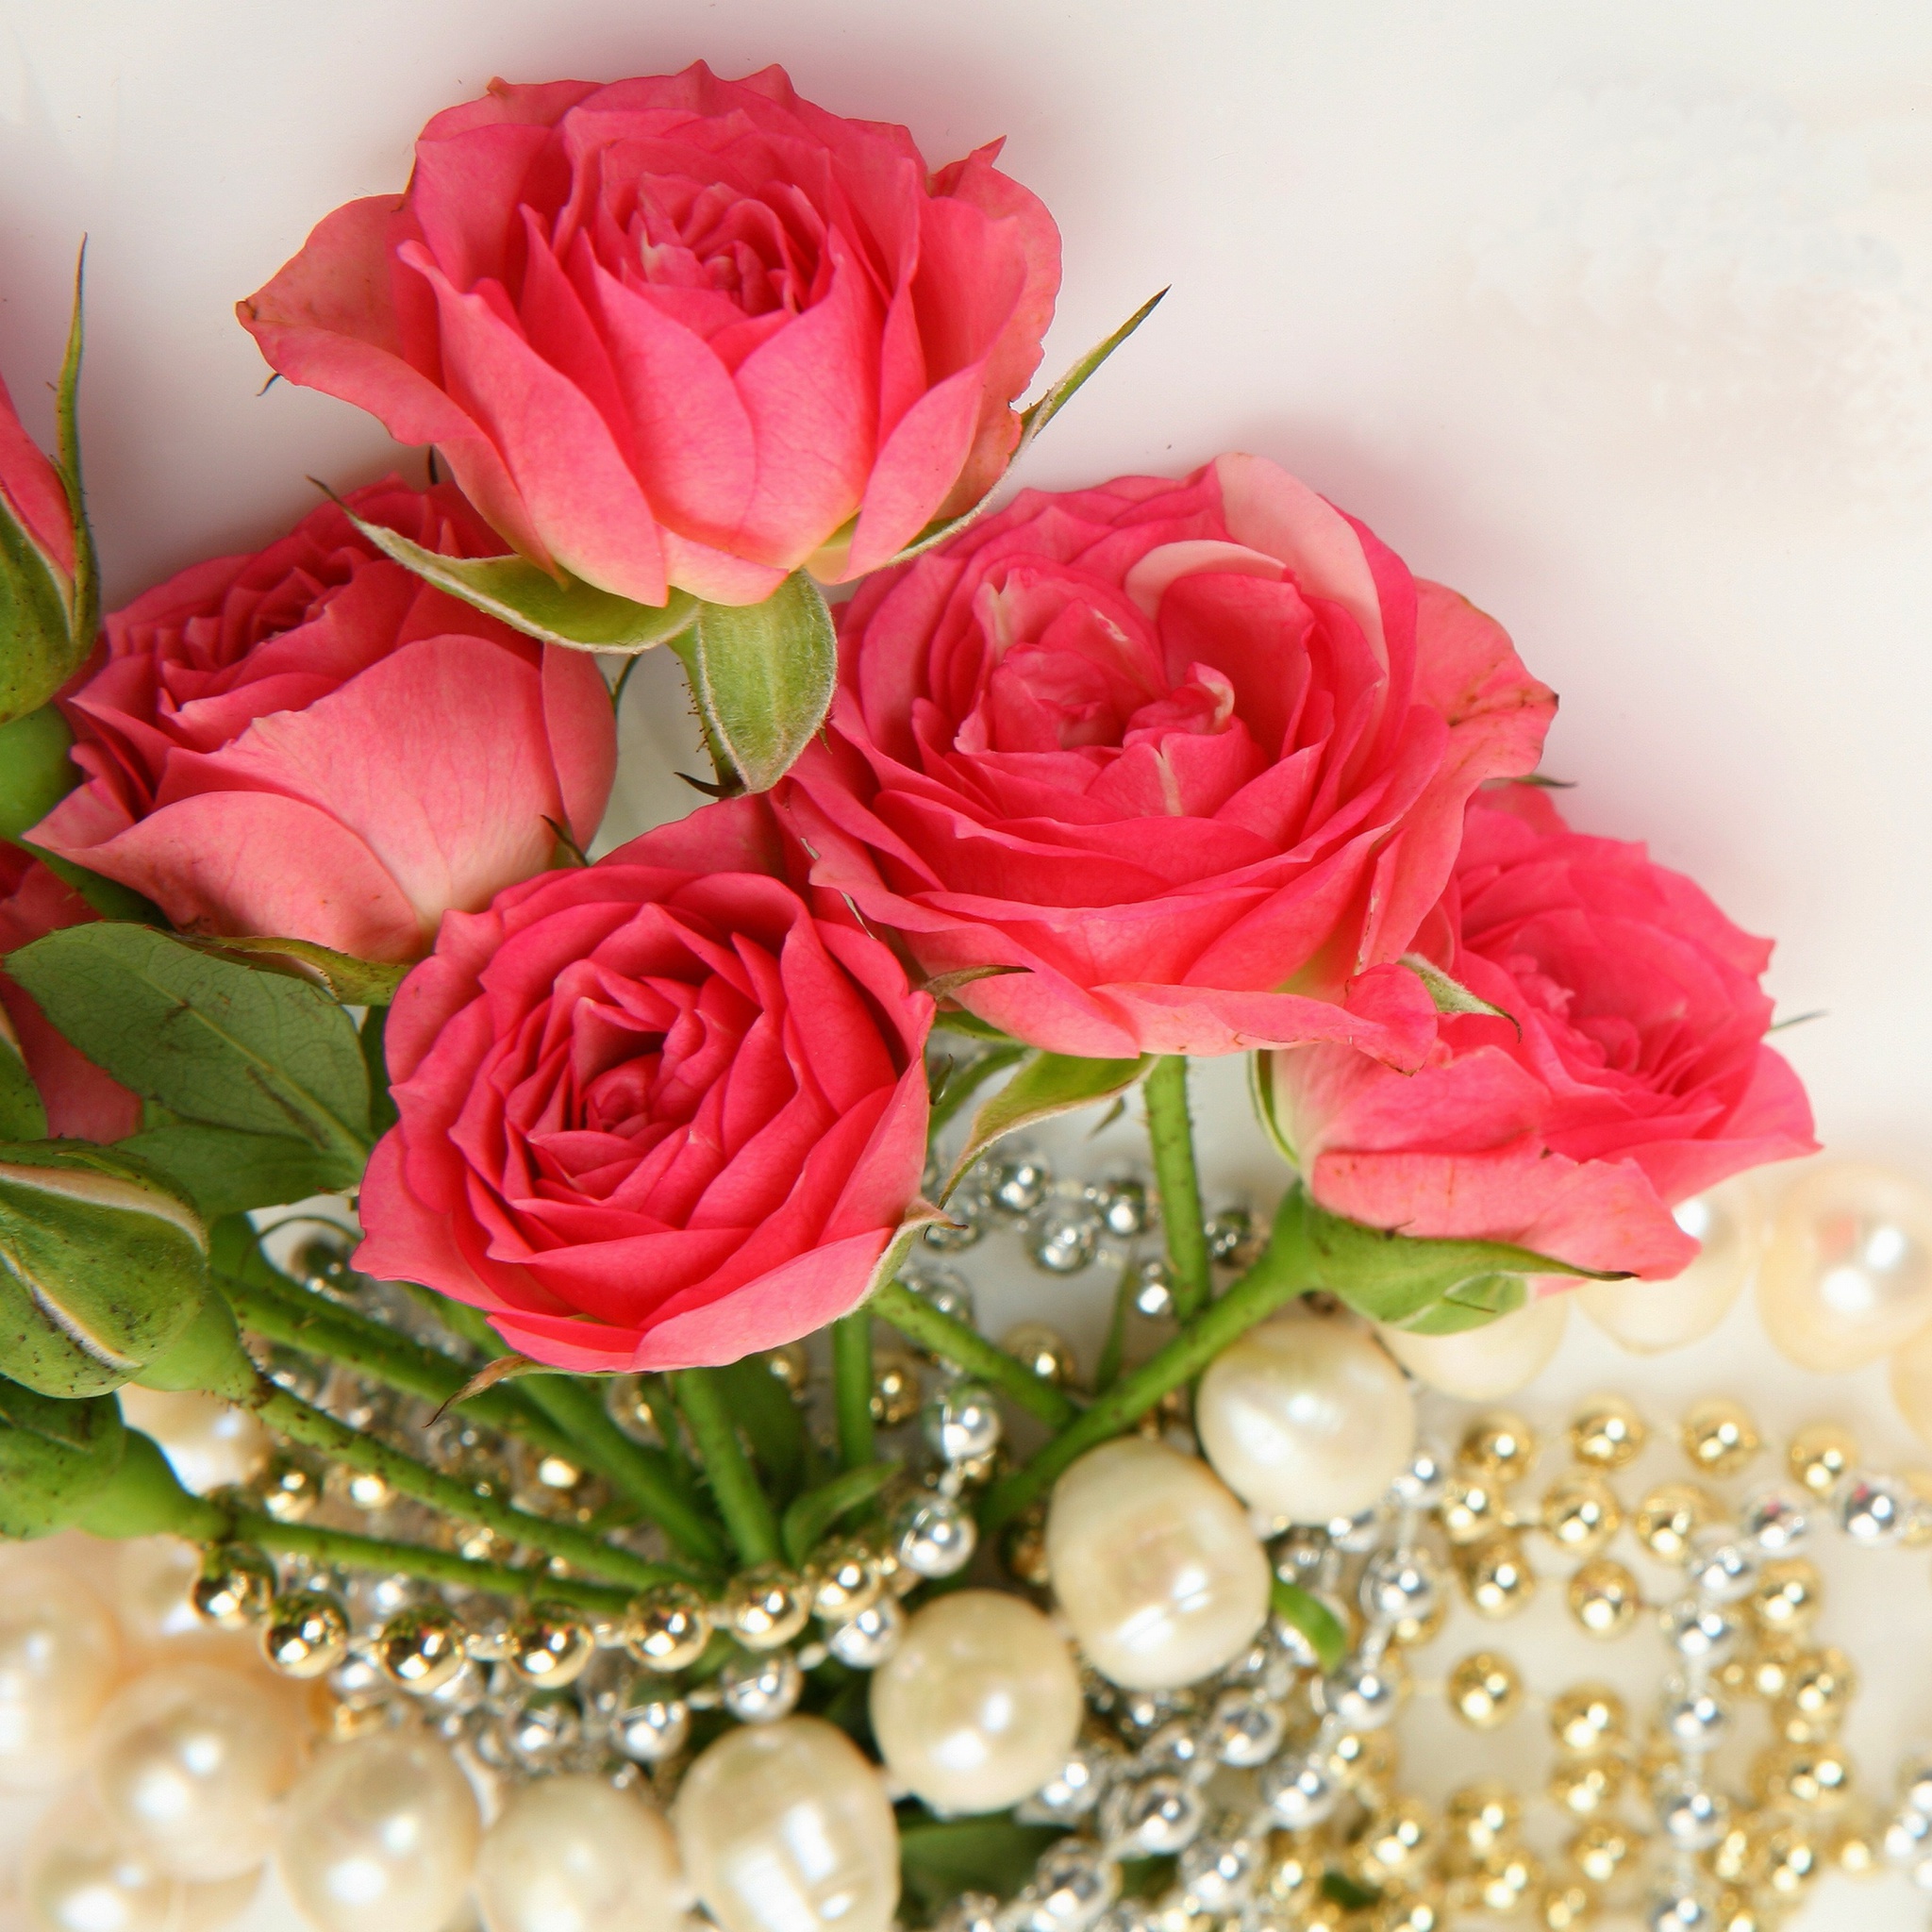 Das Necklace and Roses Bouquet Wallpaper 2048x2048